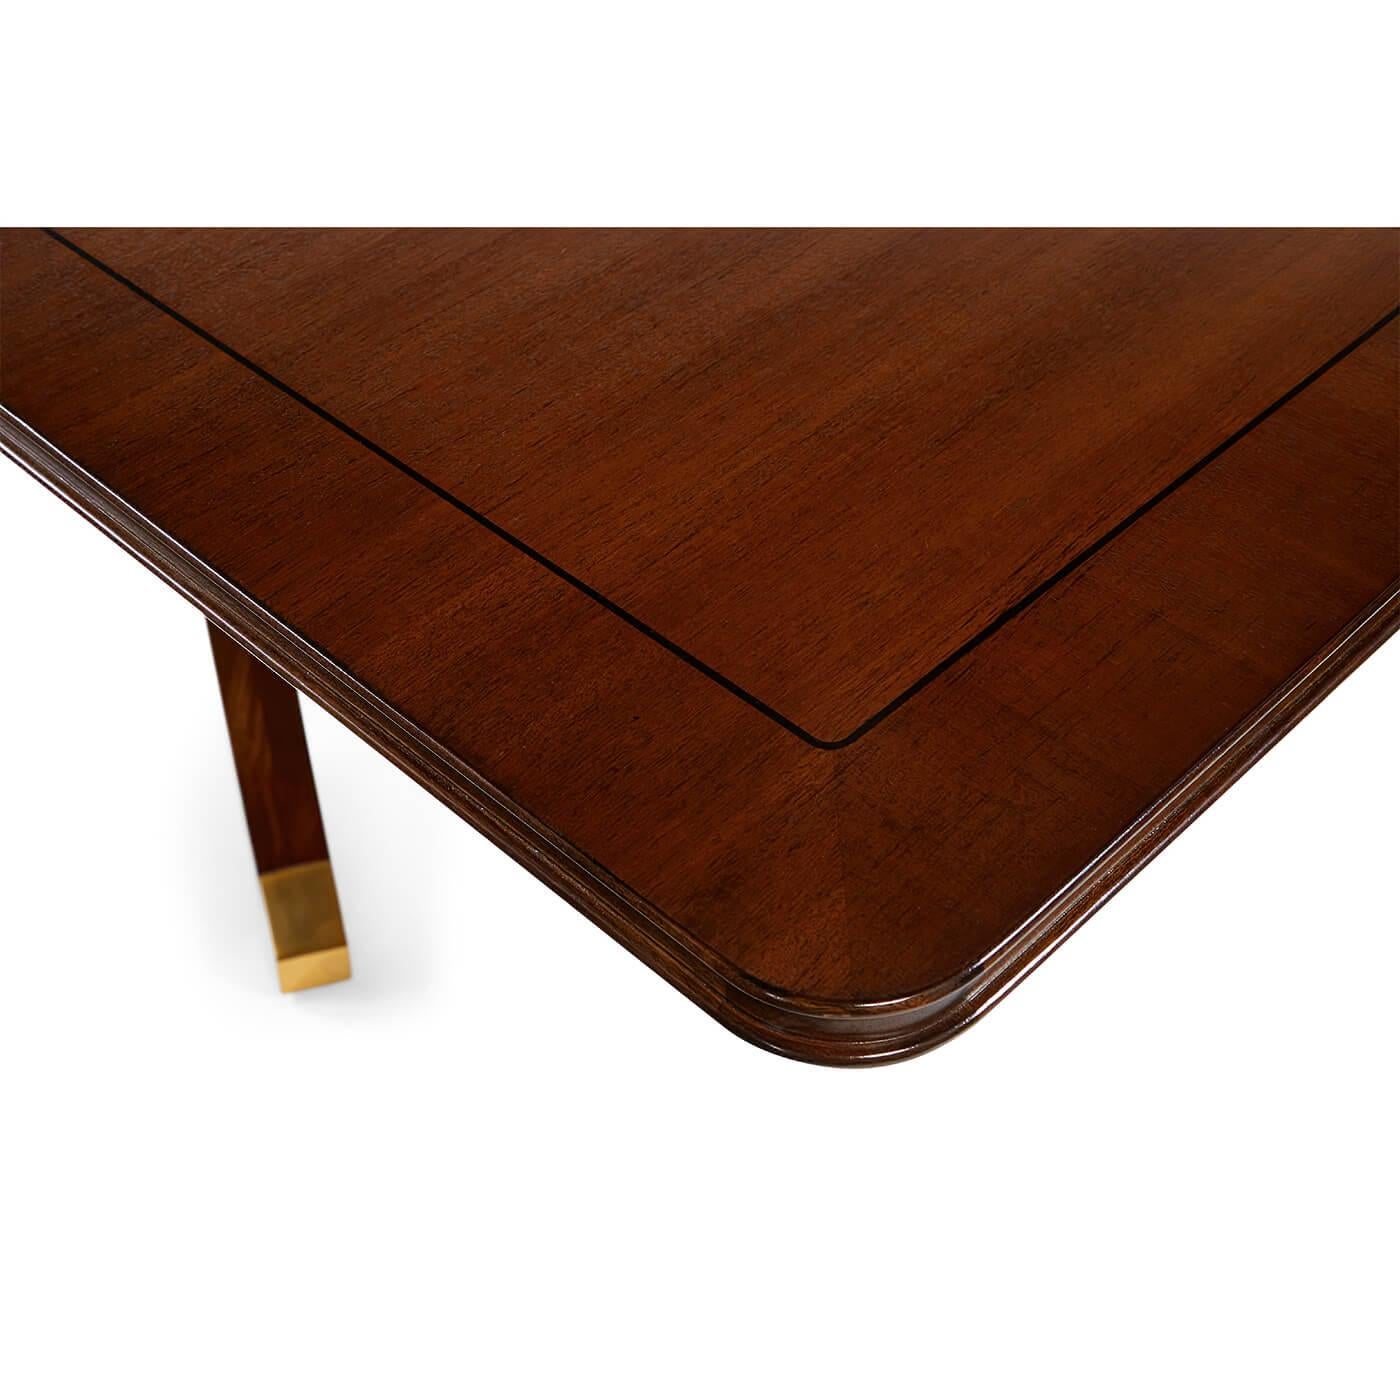 Wood Midcentury Style Extension Dining Table